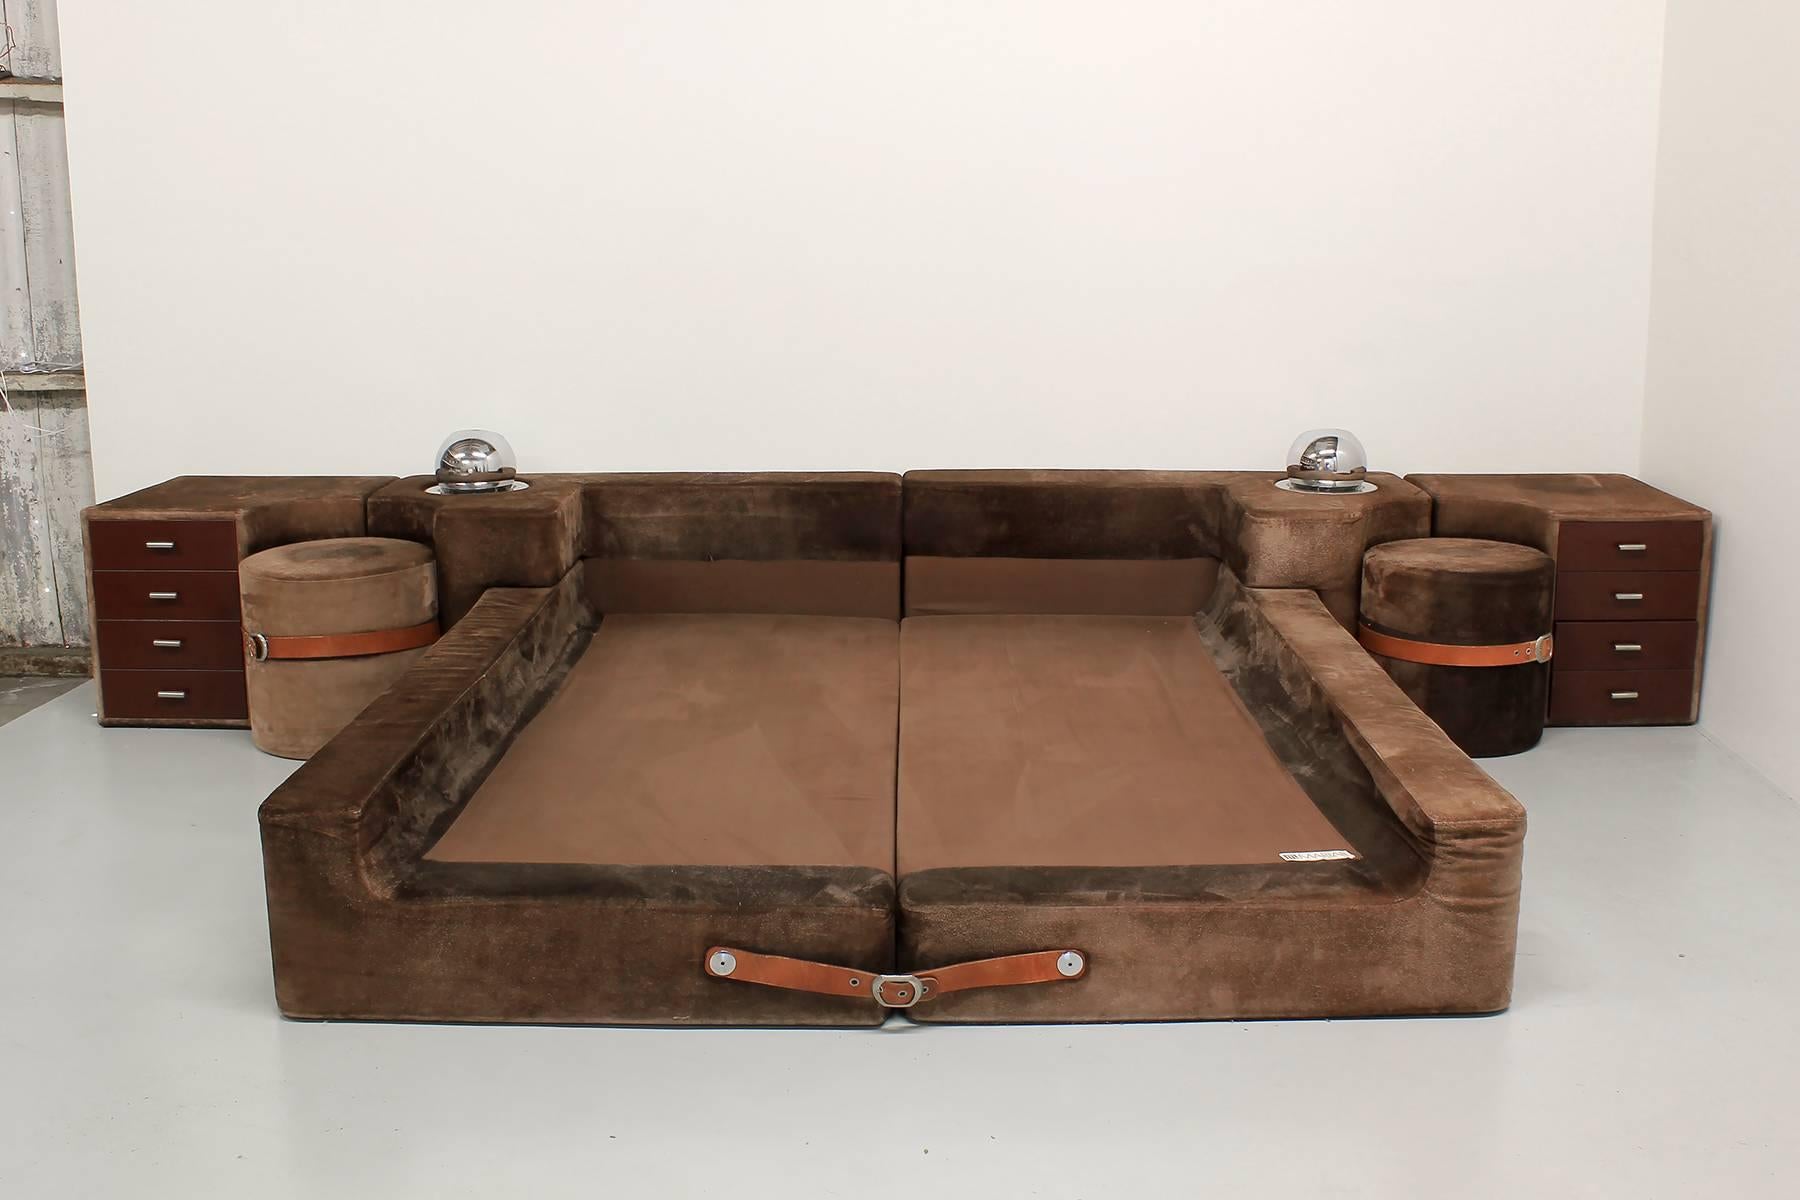 Incredible suede platform bed designed by Guido Faleschini for Mariani, Italy, imported by Pace Collection. Impressively sized with sleek and modern low profile. Finished in rich brown suede with two side tables strapped with original brown leather